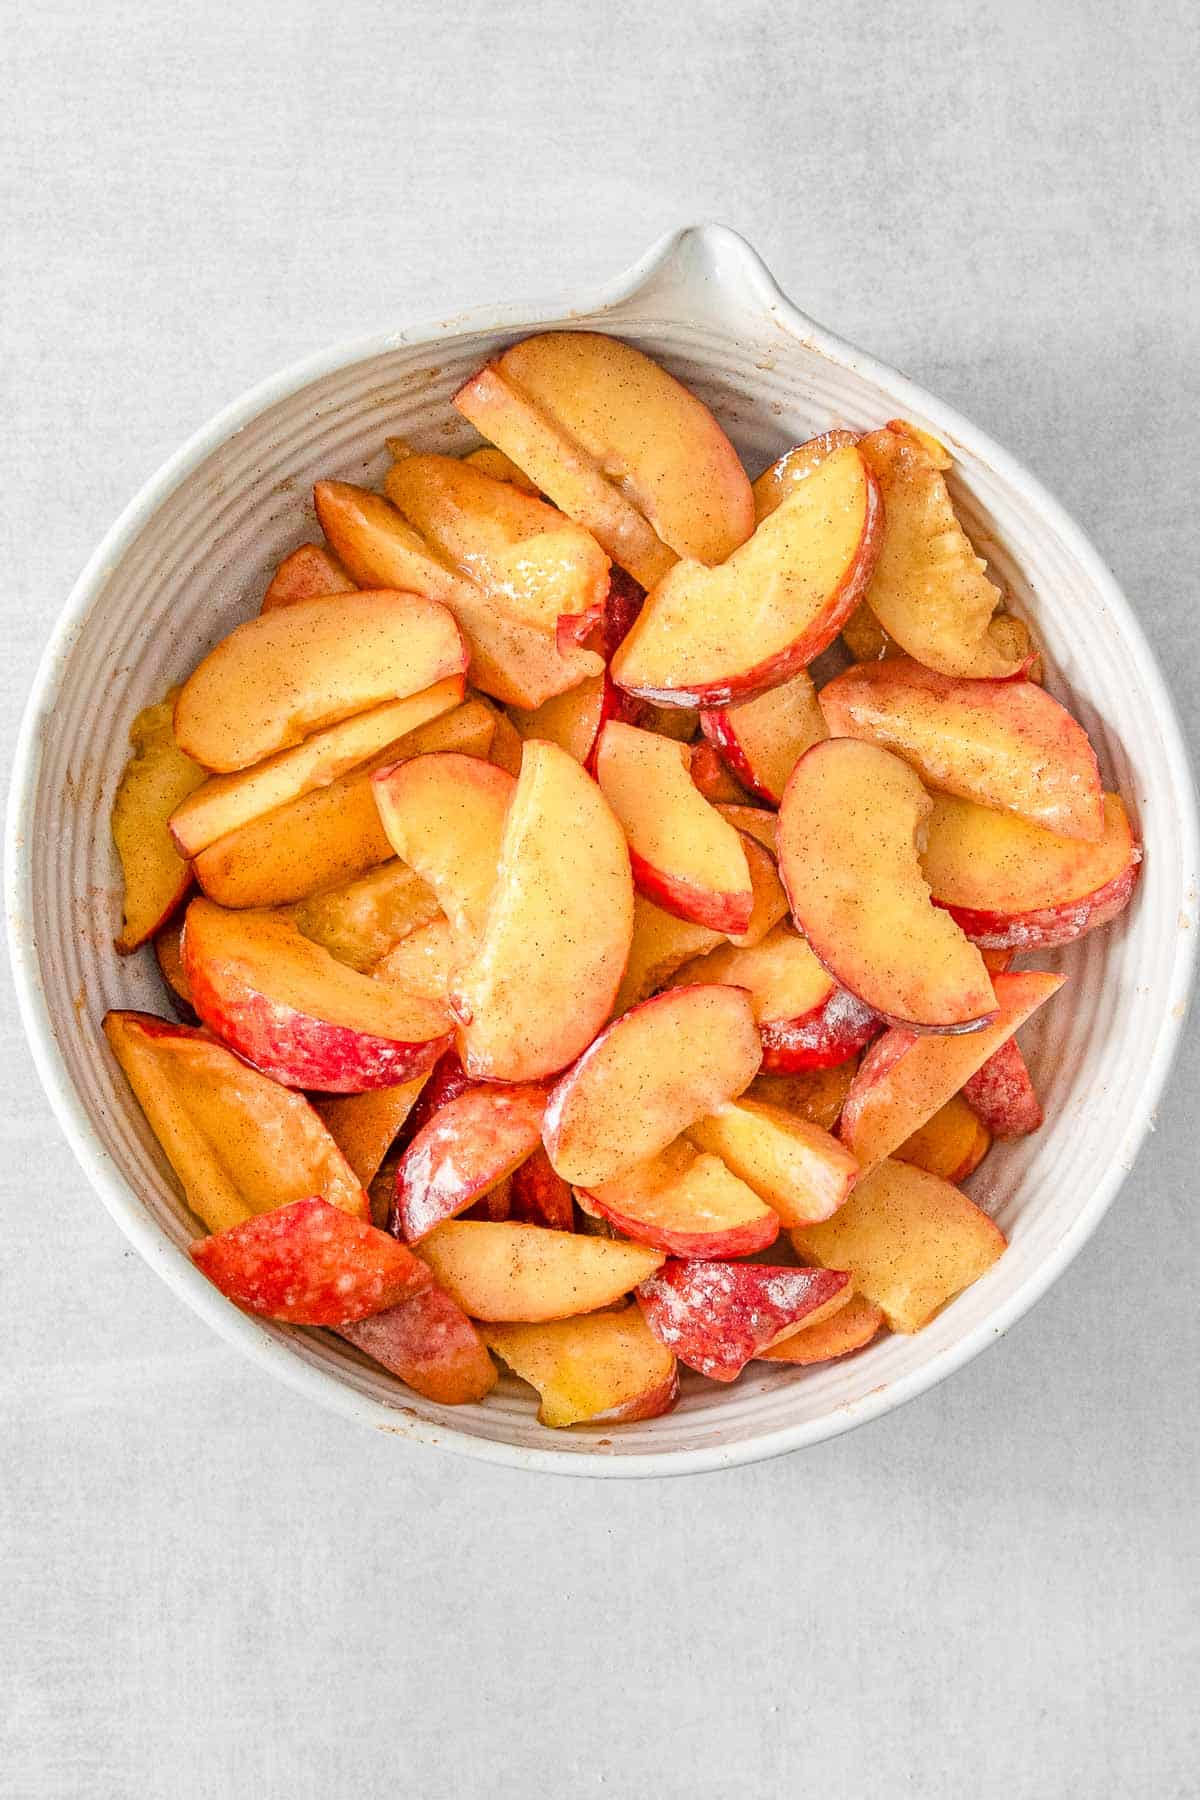 Large white bowl of sliced peaches.